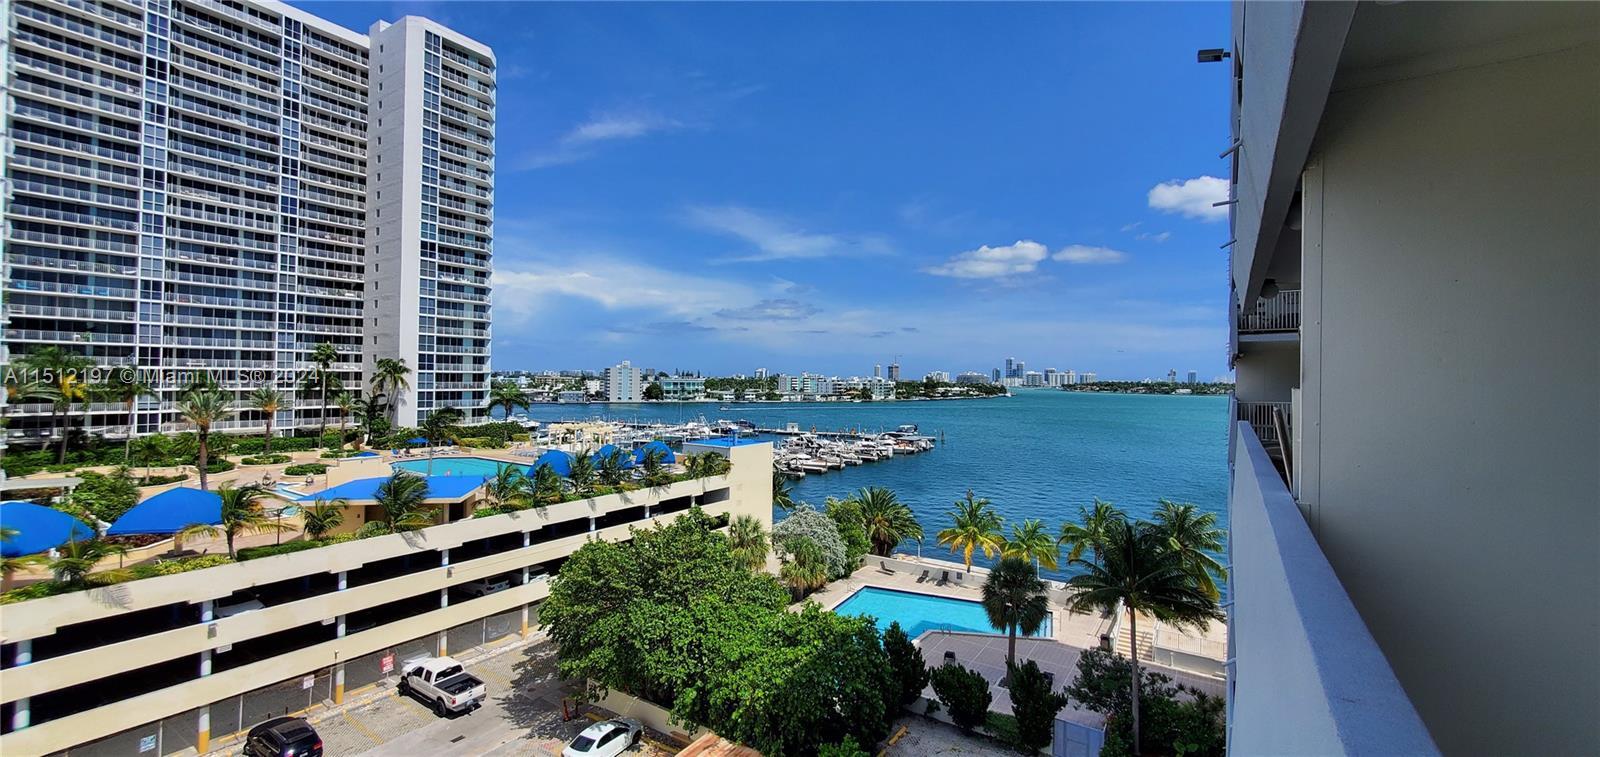 Spacious 1 Bed/1Bath with beautiful intracoastal views and an ample balcony. Great location, close t